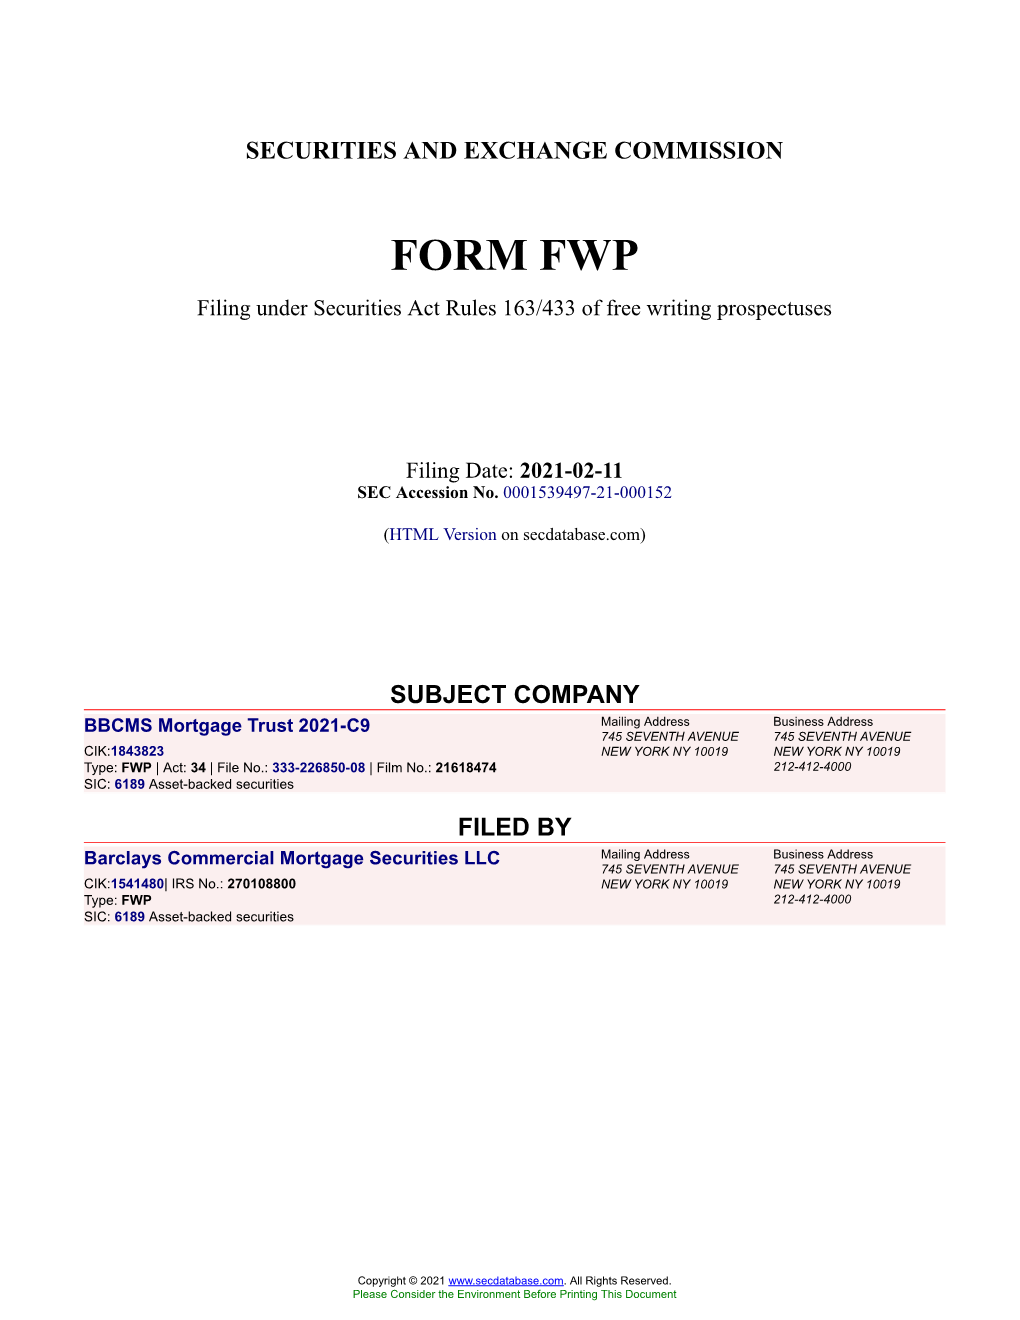 BBCMS Mortgage Trust 2021-C9 Form FWP Filed 2021-02-11